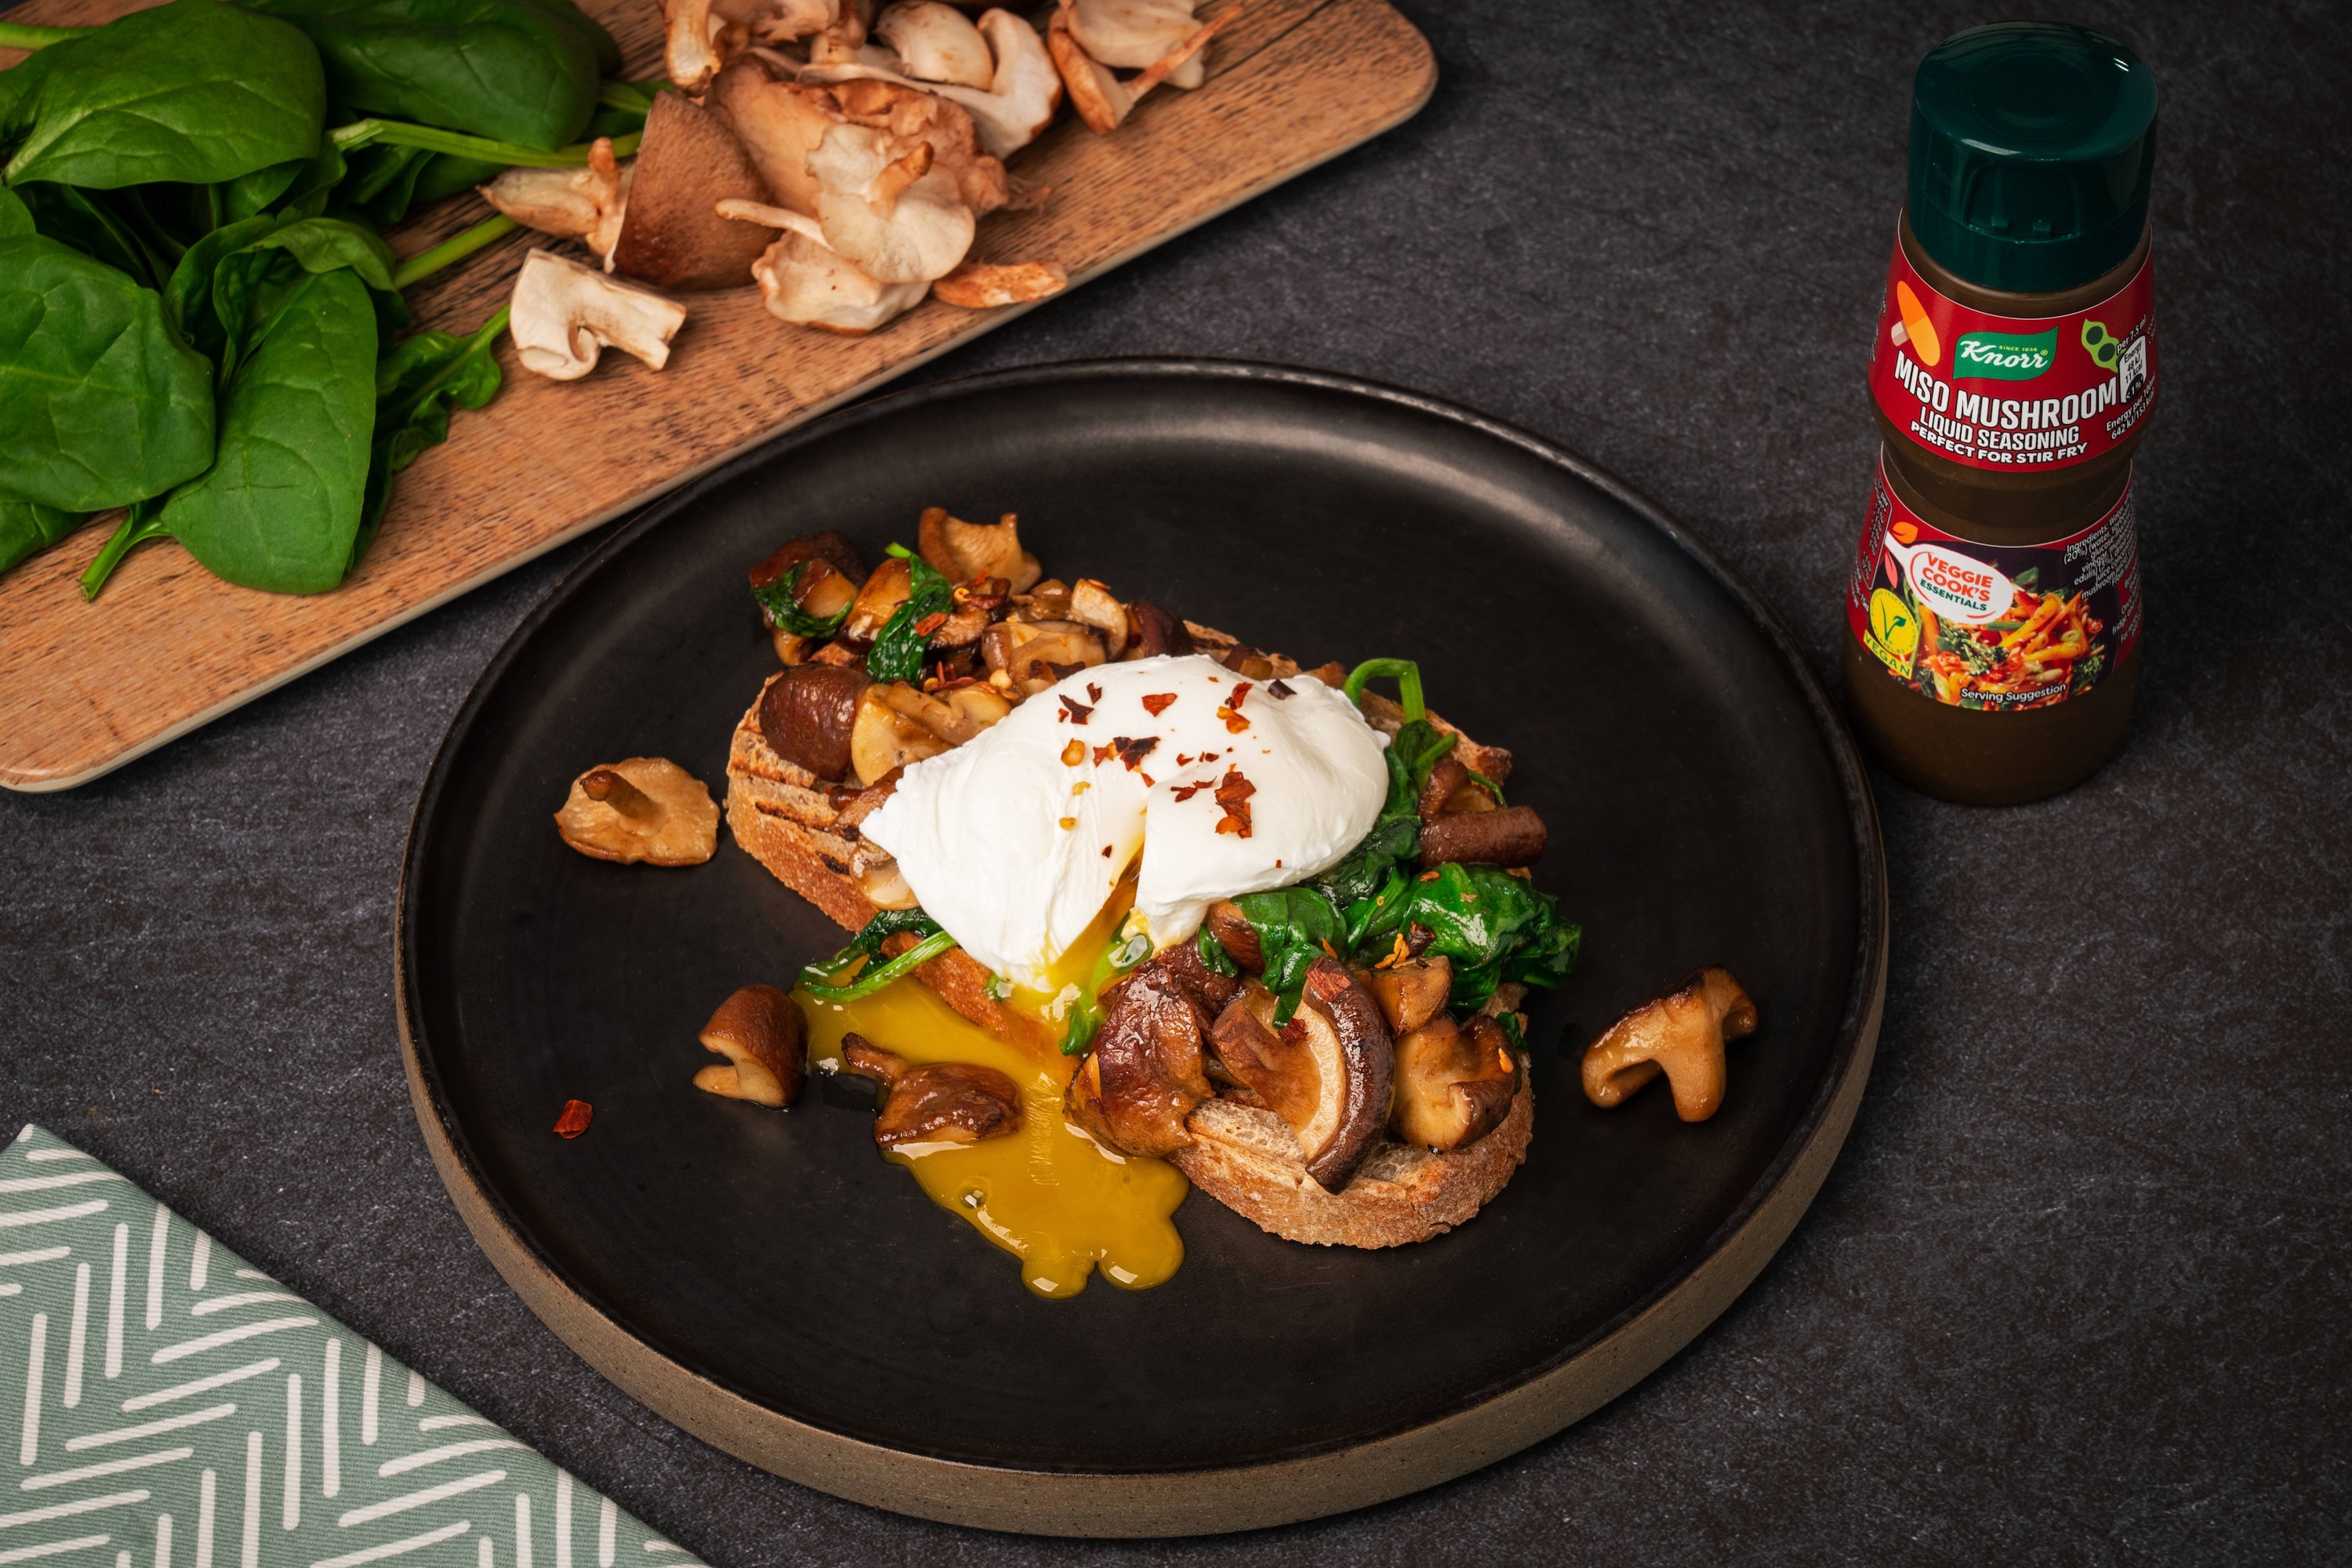 Pan Fried Mushroom and Poached Egg